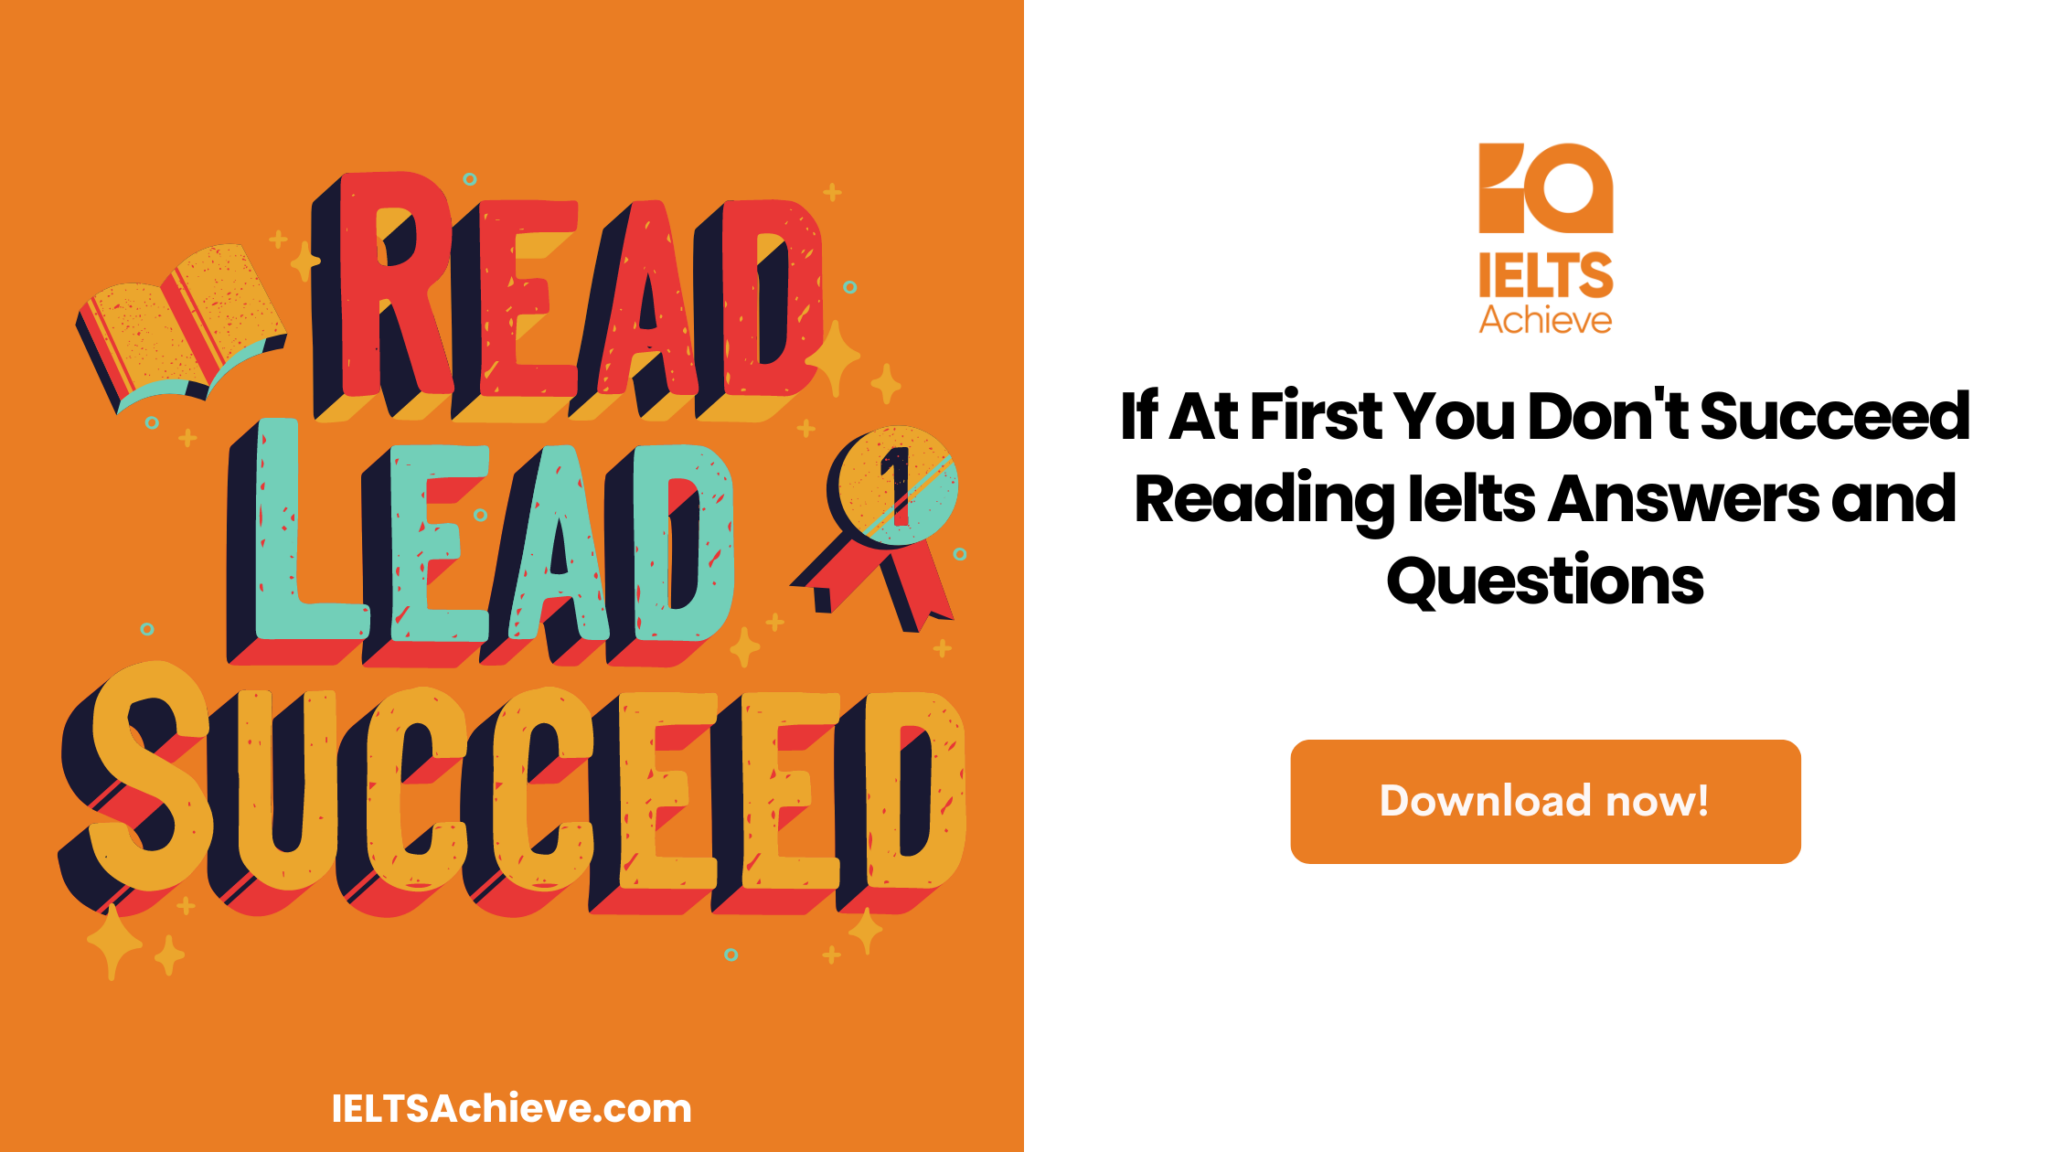 If At First You Don't Succeed Reading Ielts Answers and Questions